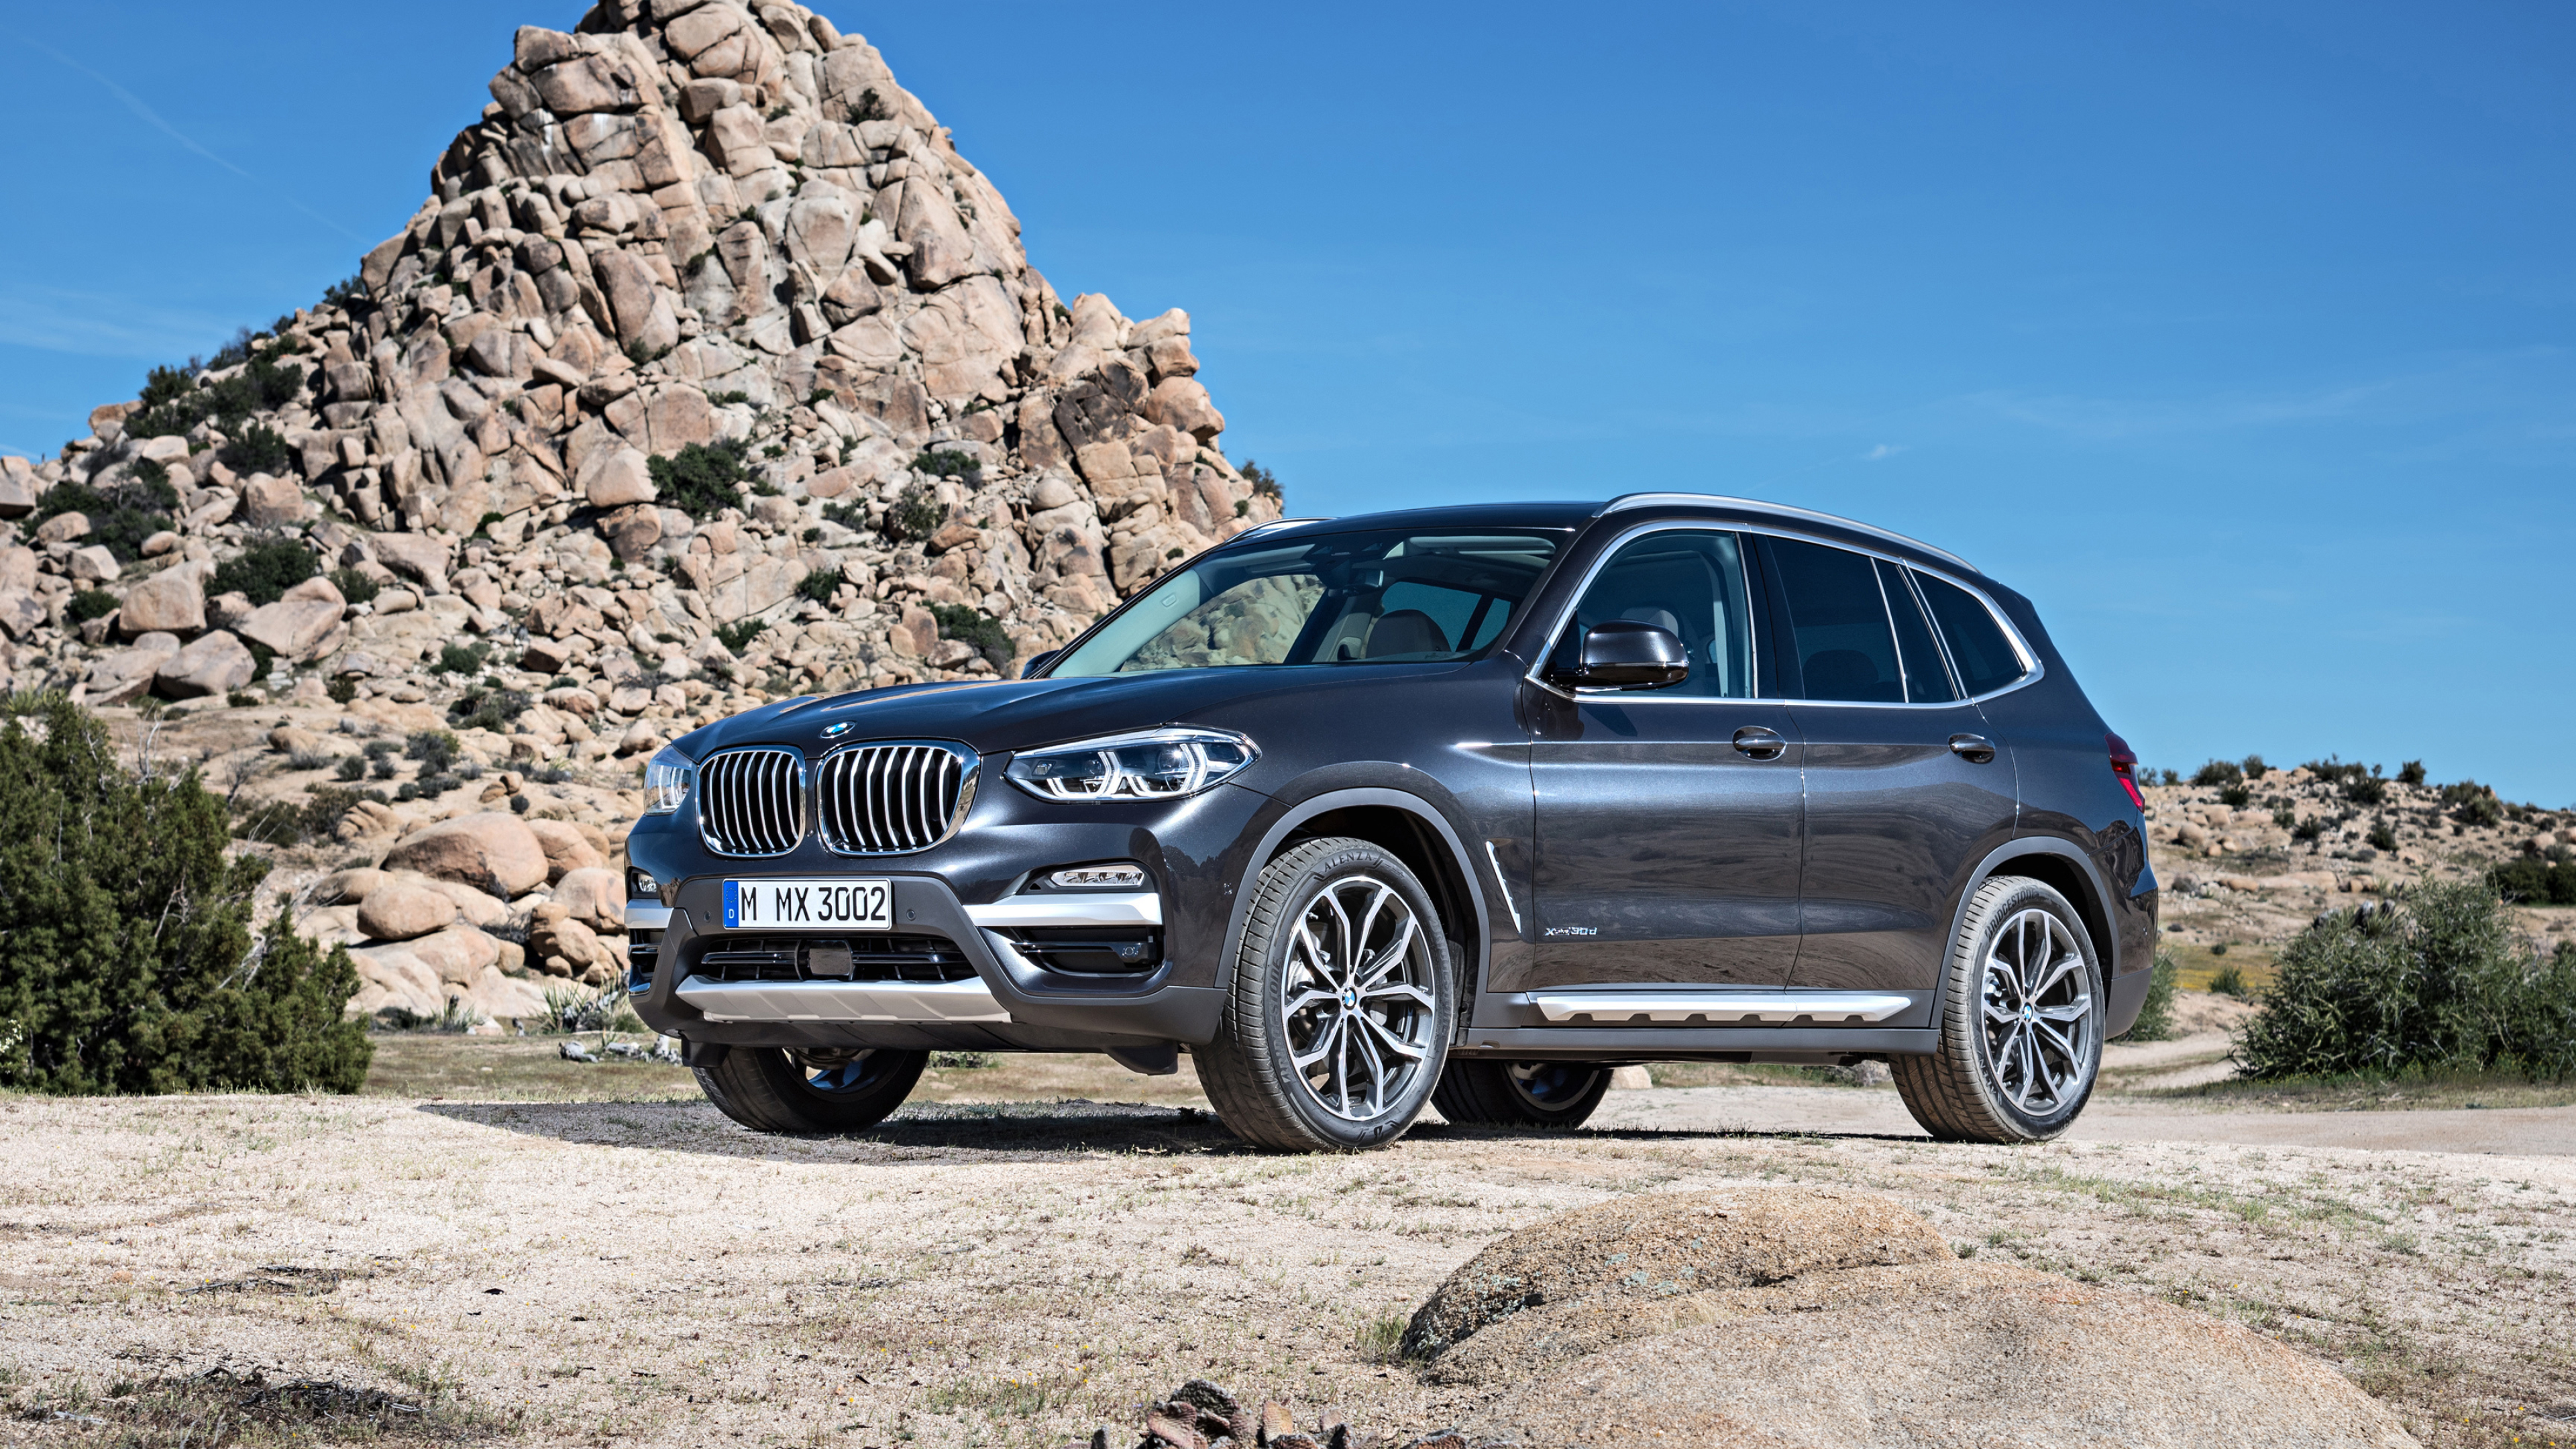 BMW X3, Premium crossover, Dynamic driving experience, Practicality and style, 3840x2160 4K Desktop